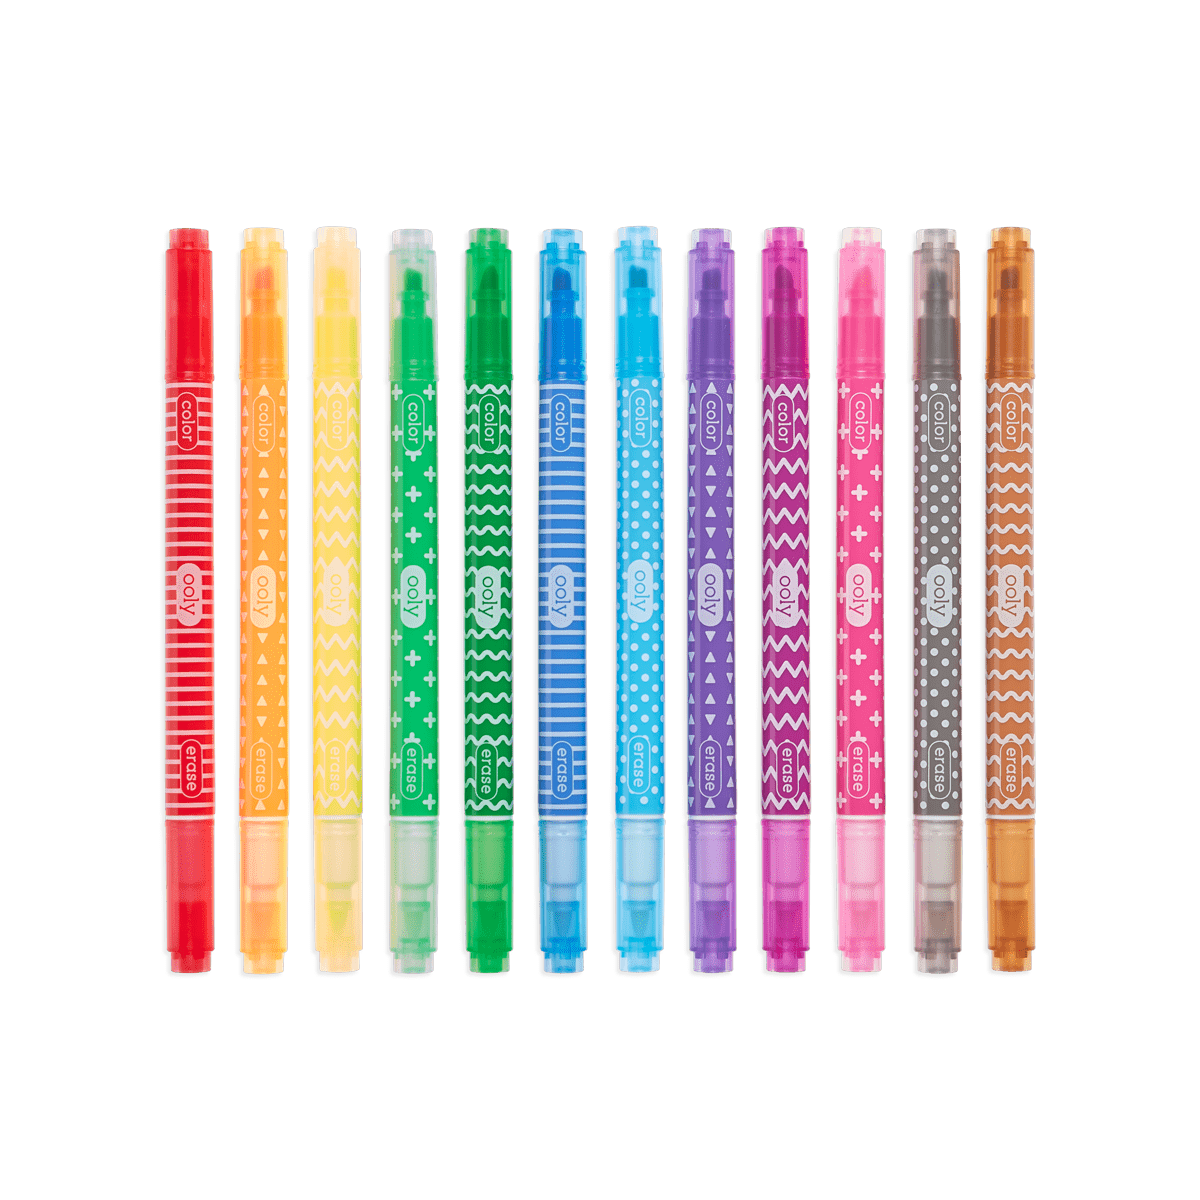 OOLY Make No Mistake Erasable Markers - Set of 12 by OOLY